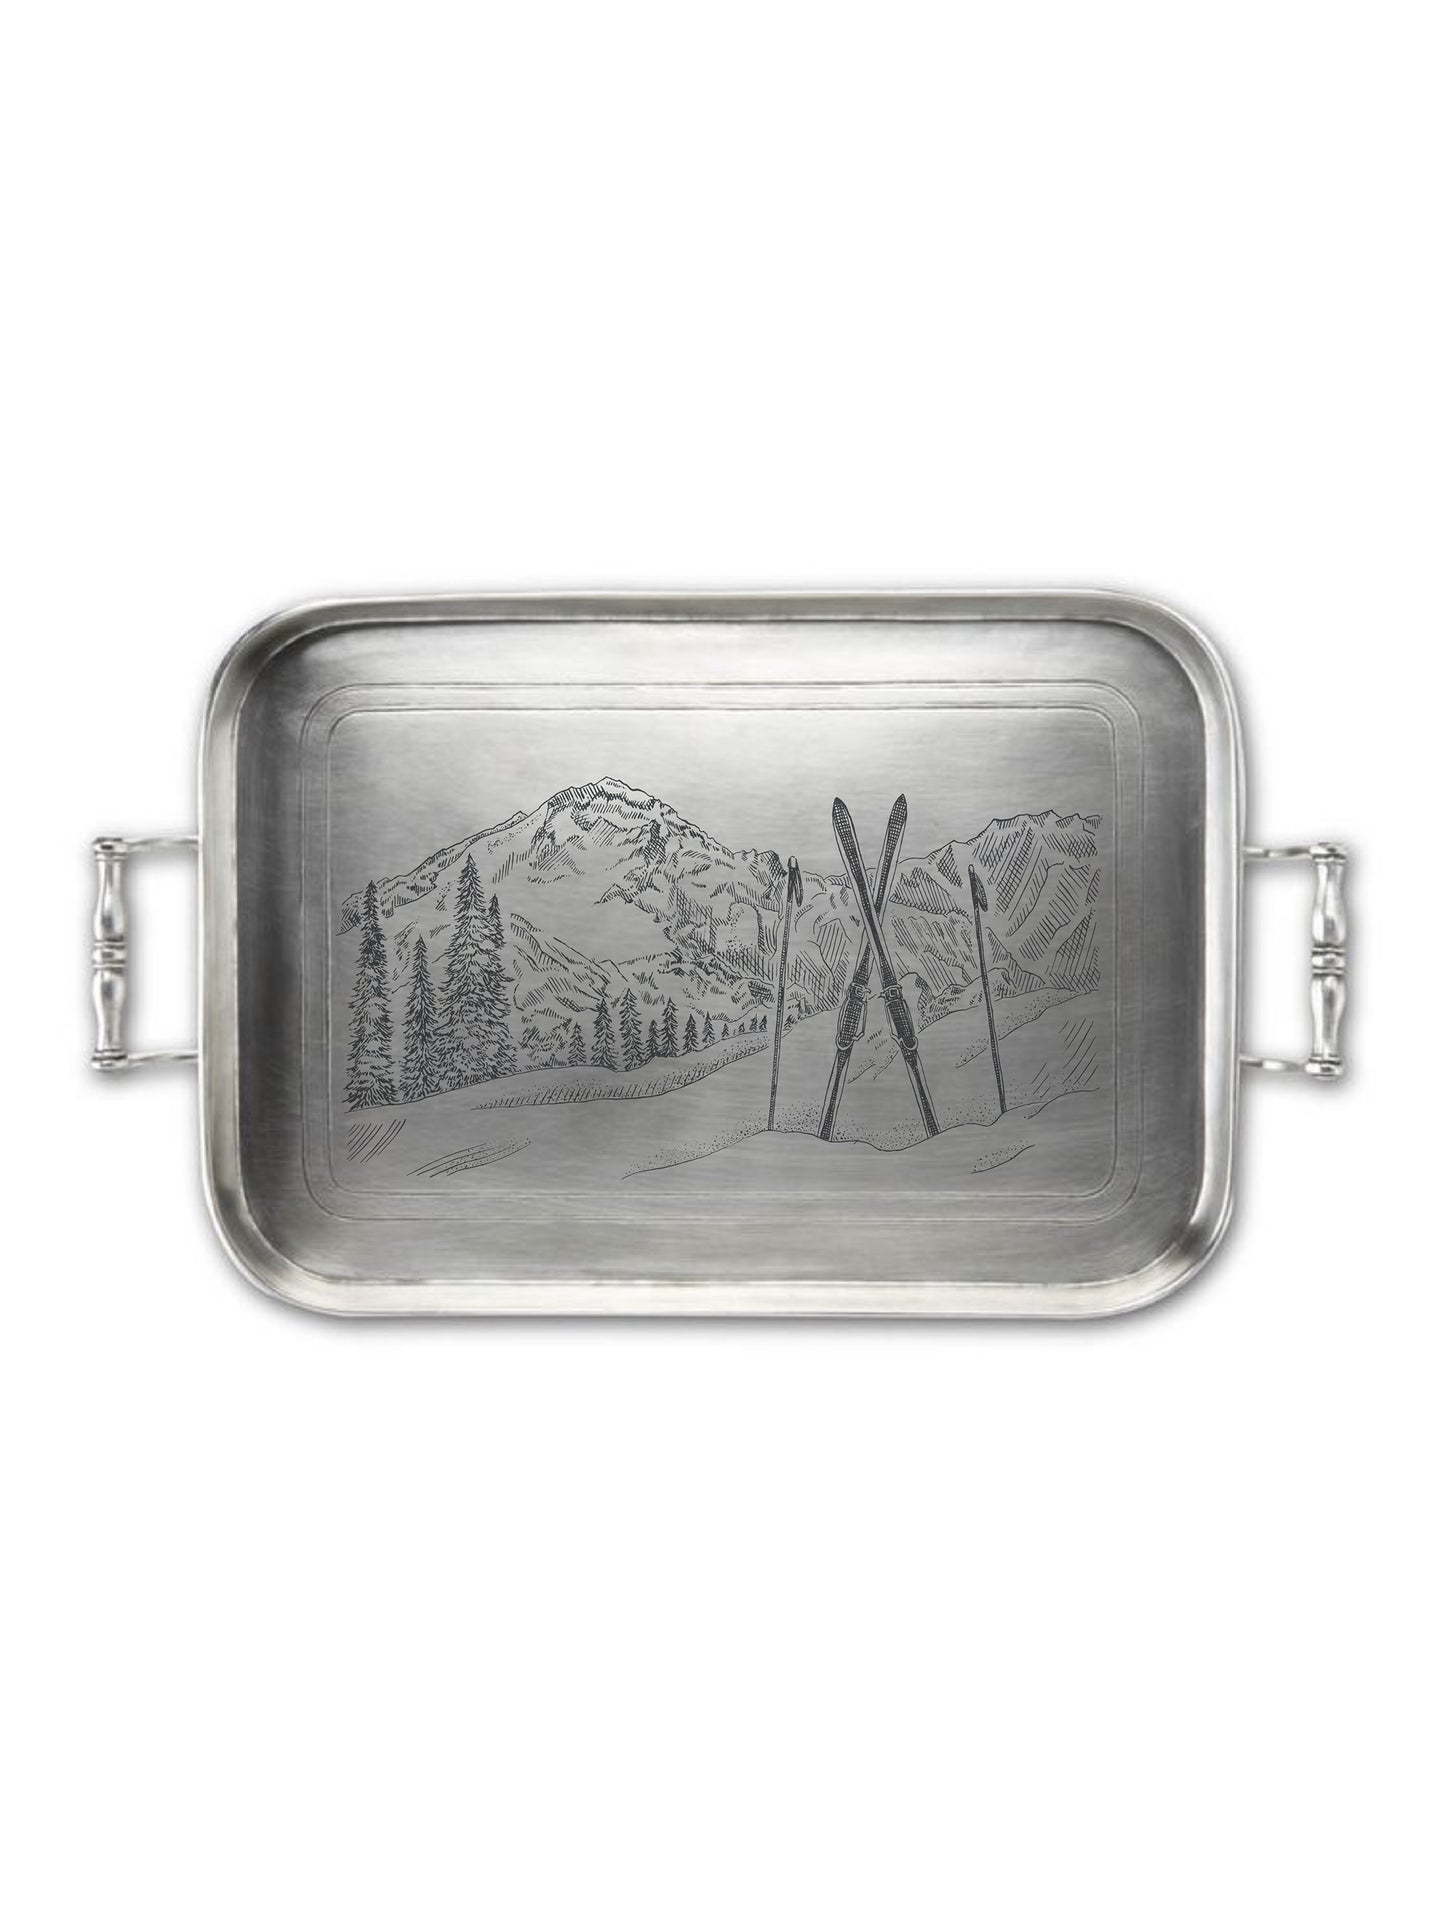  MATCH Pewter Ski Gallery Tray Large Weston Table